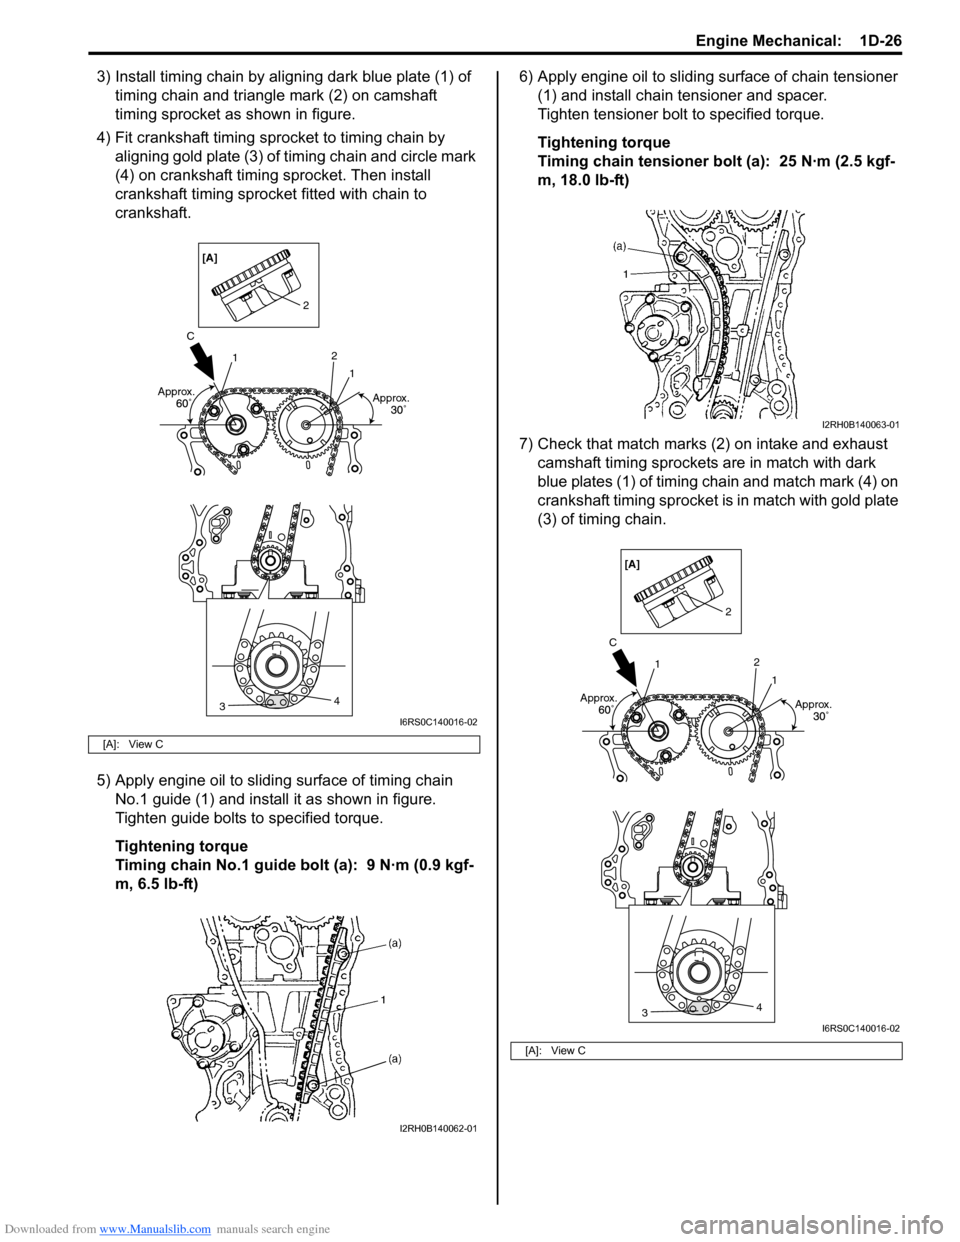 SUZUKI SWIFT 2006 2.G Service User Guide Downloaded from www.Manualslib.com manuals search engine Engine Mechanical:  1D-26
3) Install timing chain by aligning dark blue plate (1) of timing chain and triangle mark (2) on camshaft 
timing spr